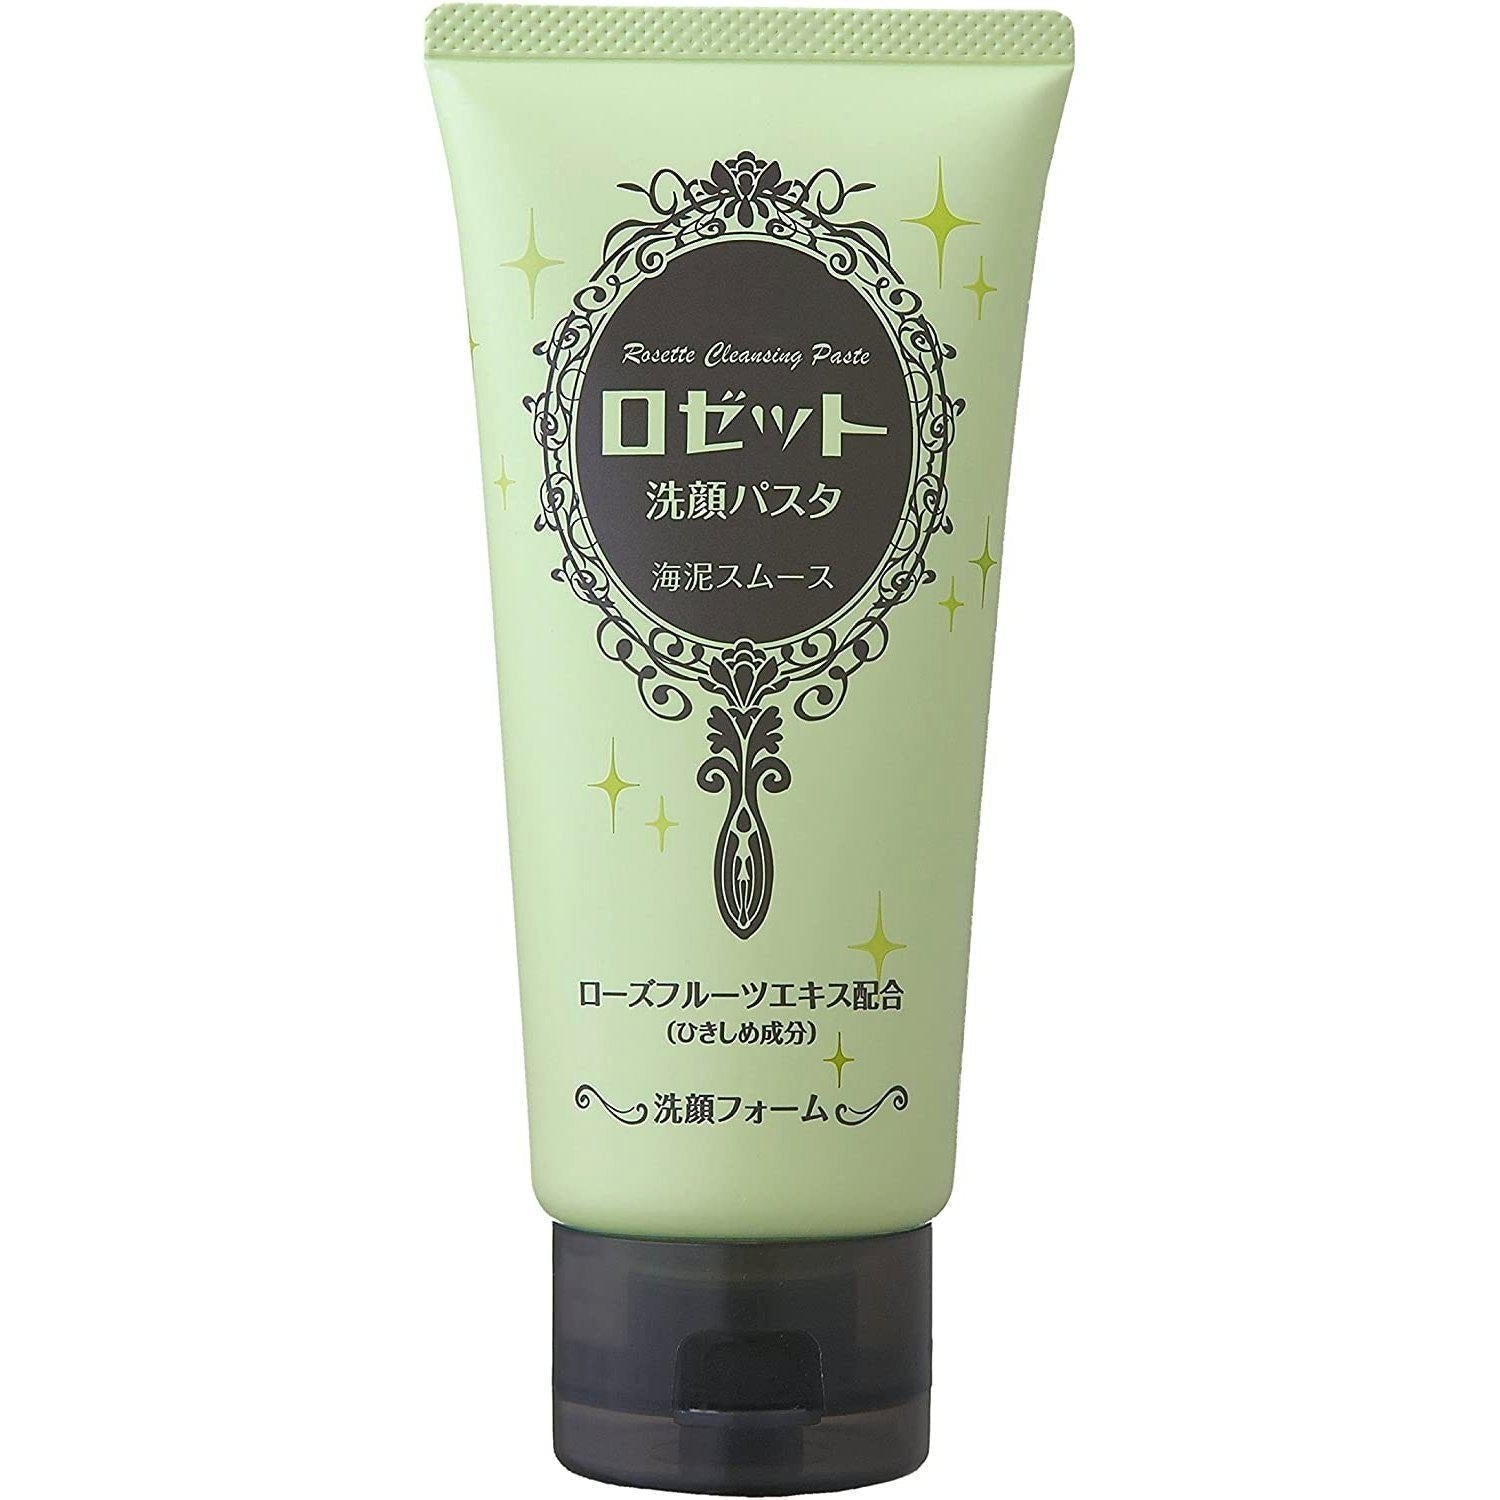 P-1-RST-PFW-SC-120-Rosette Cleansing Paste Sea Clay Smooth Foam Cleanser 120g.jpg